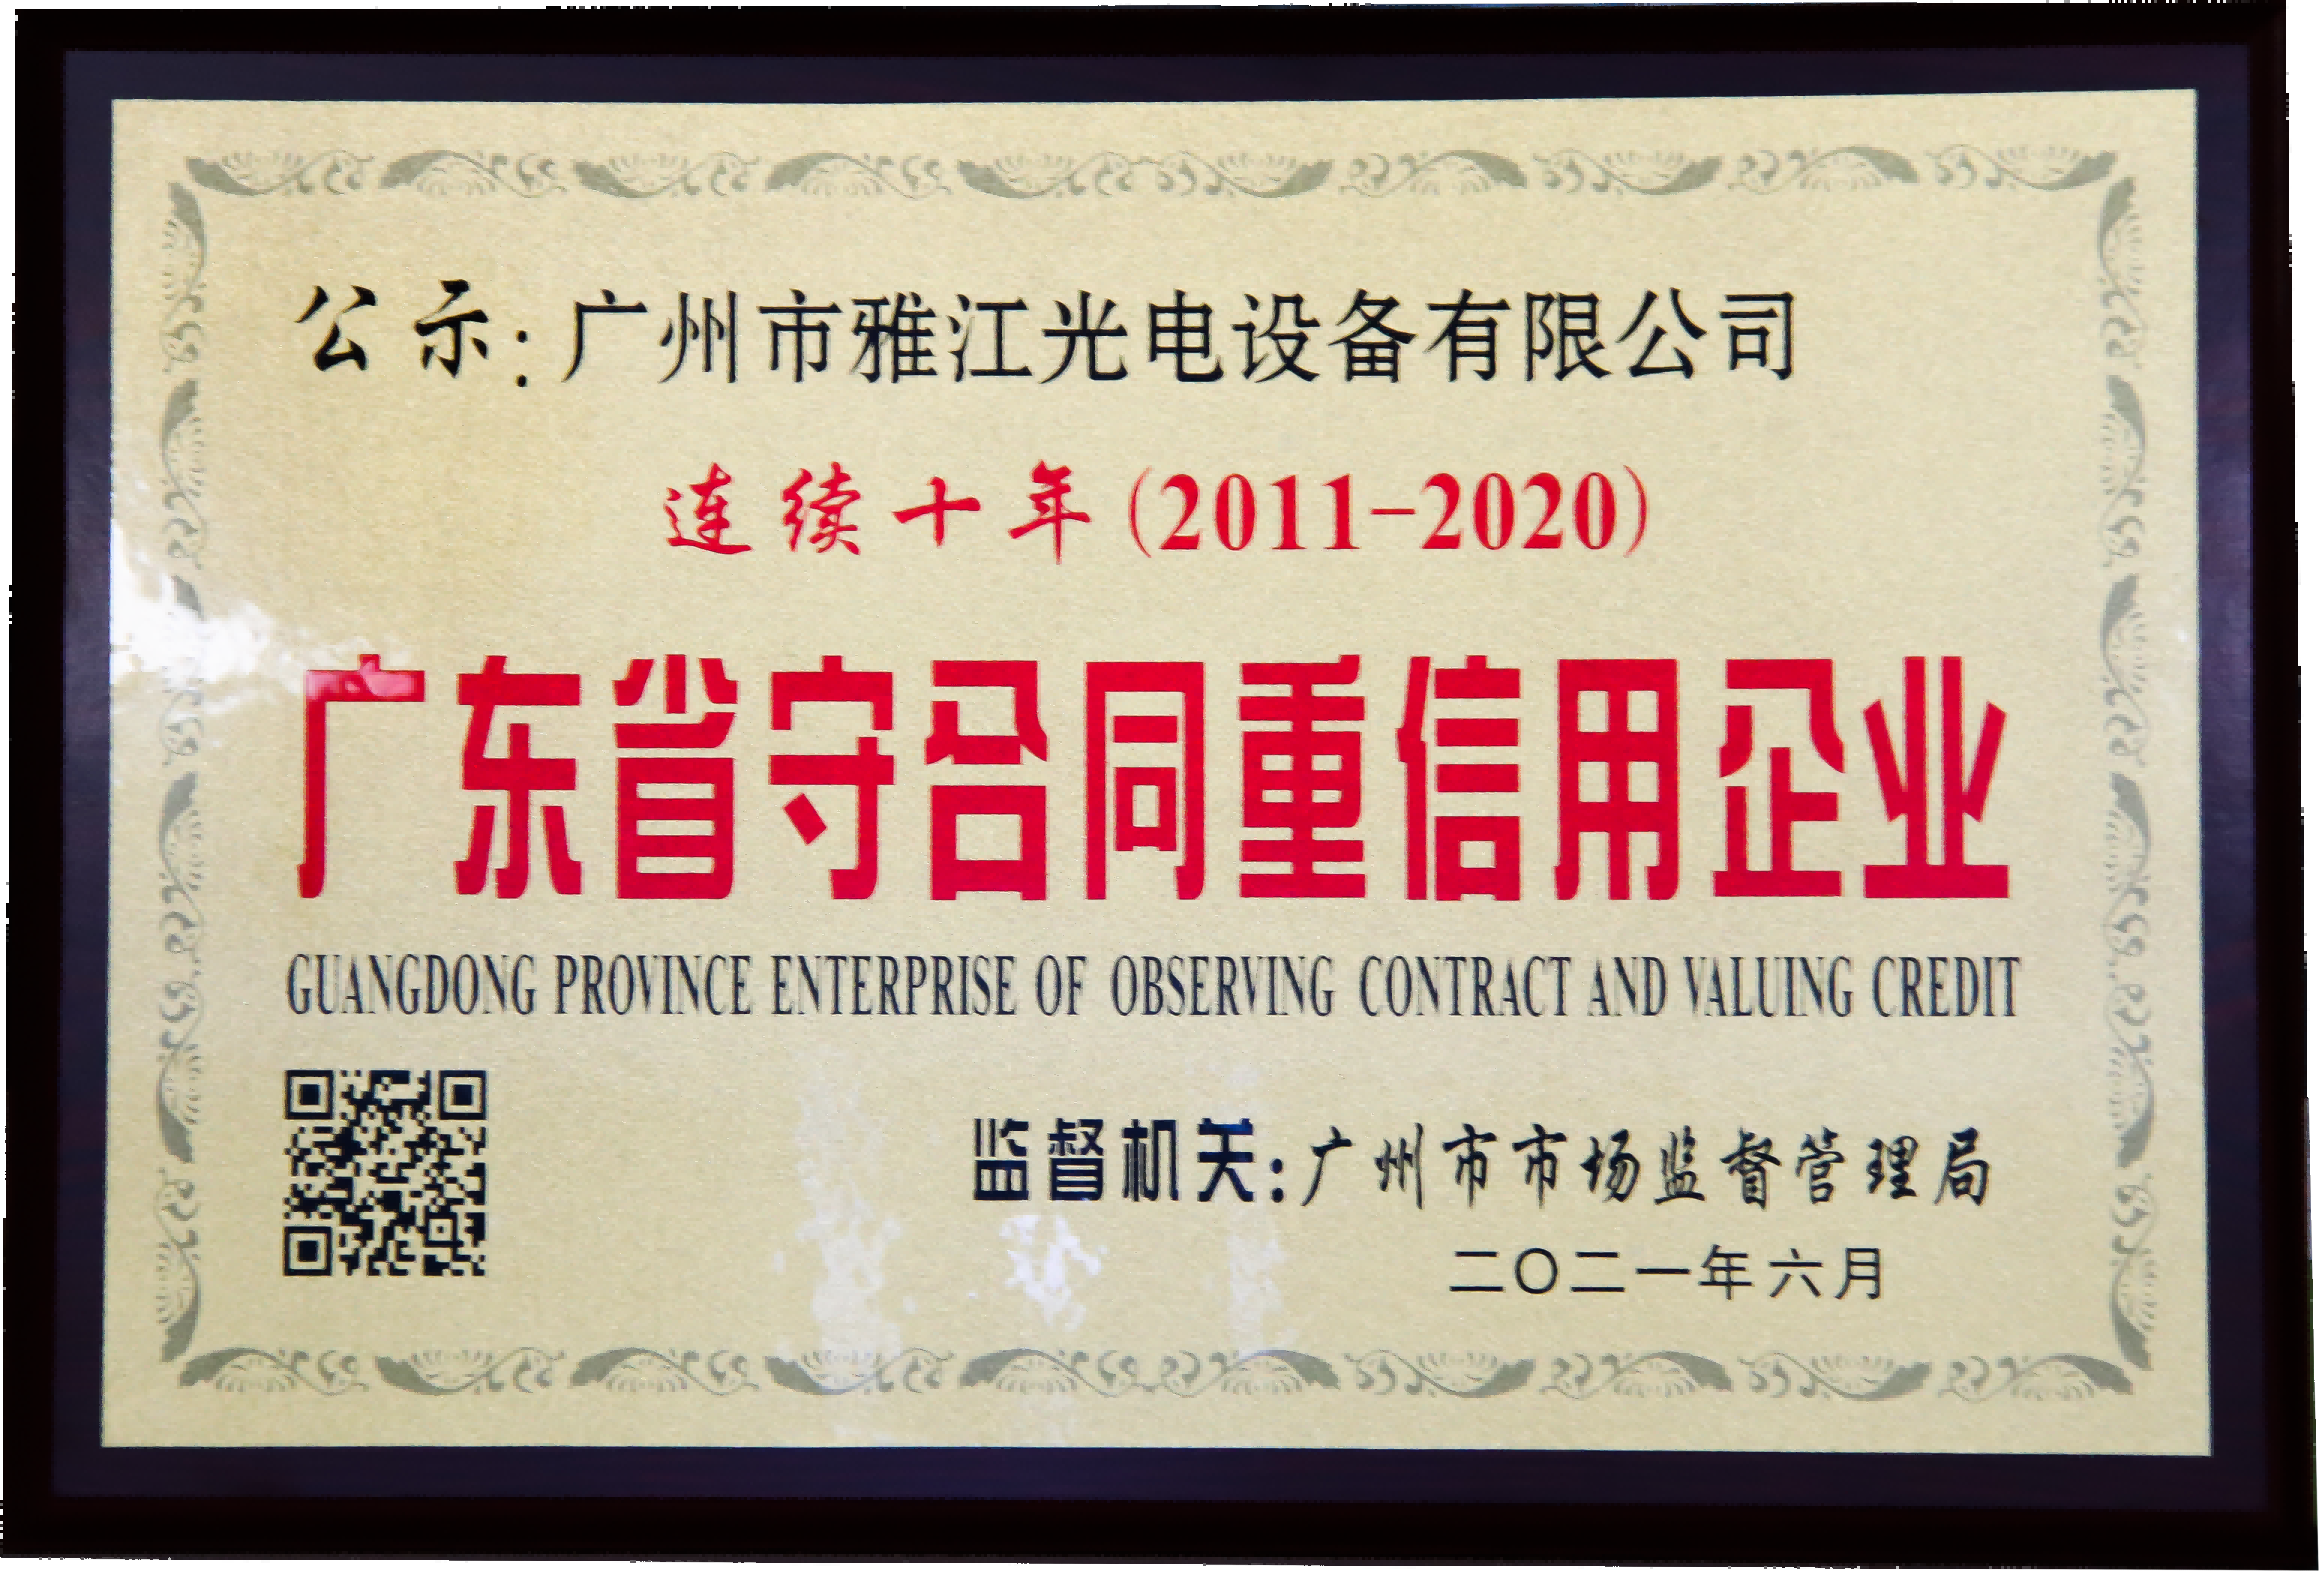 Guangdong Province abide by the contract and credit enterprises